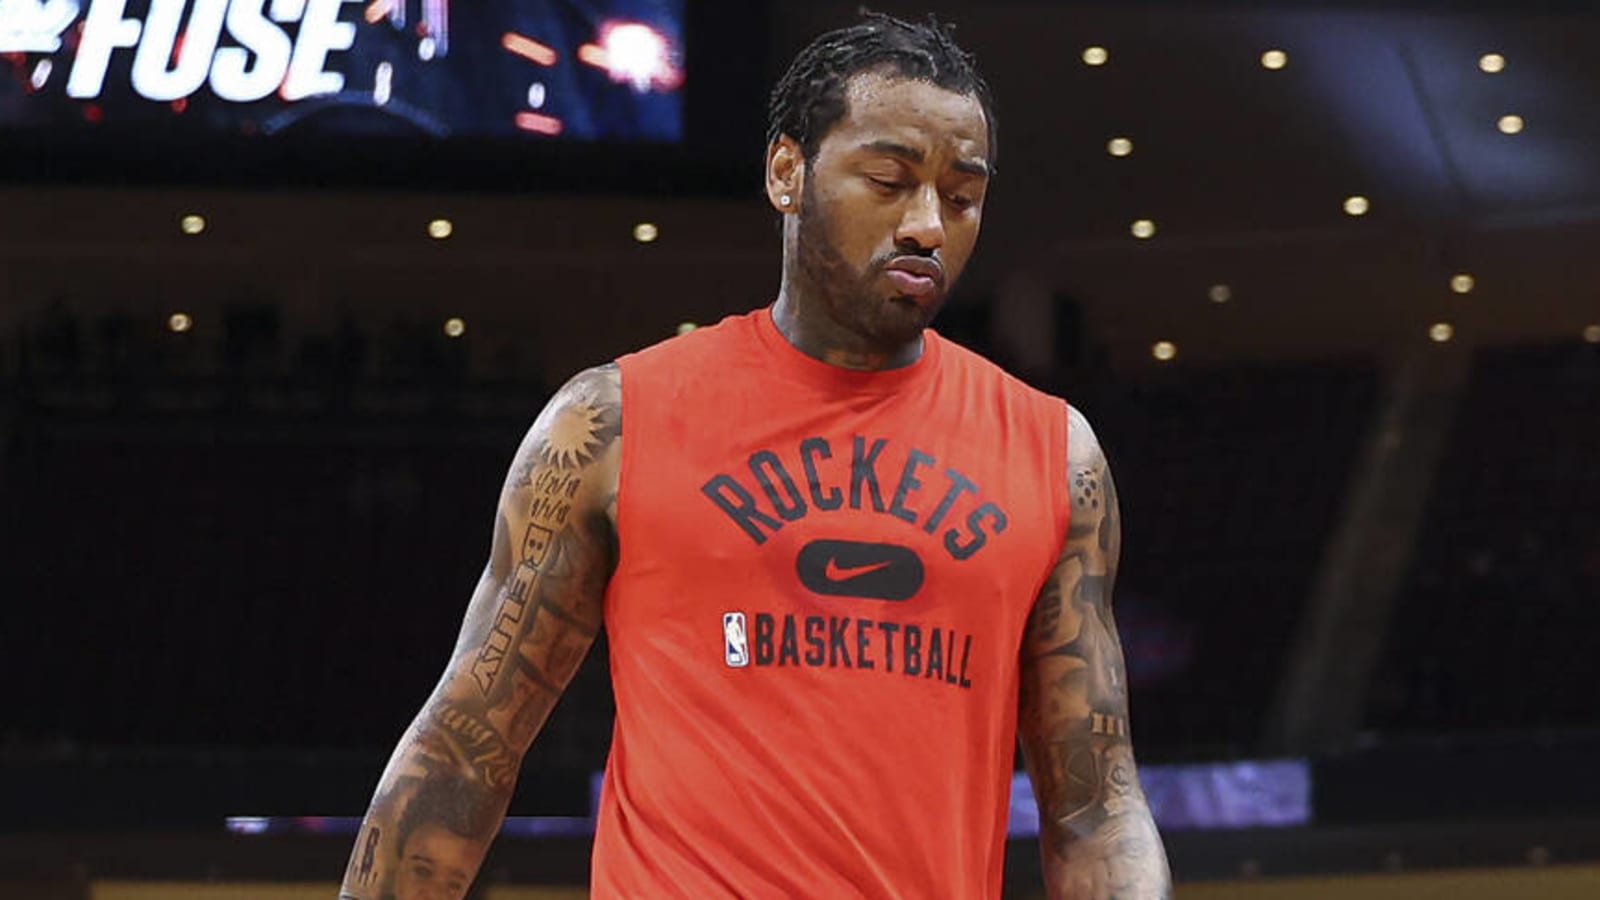 John Wall set to join LA Clippers after Houston Rockets buyout